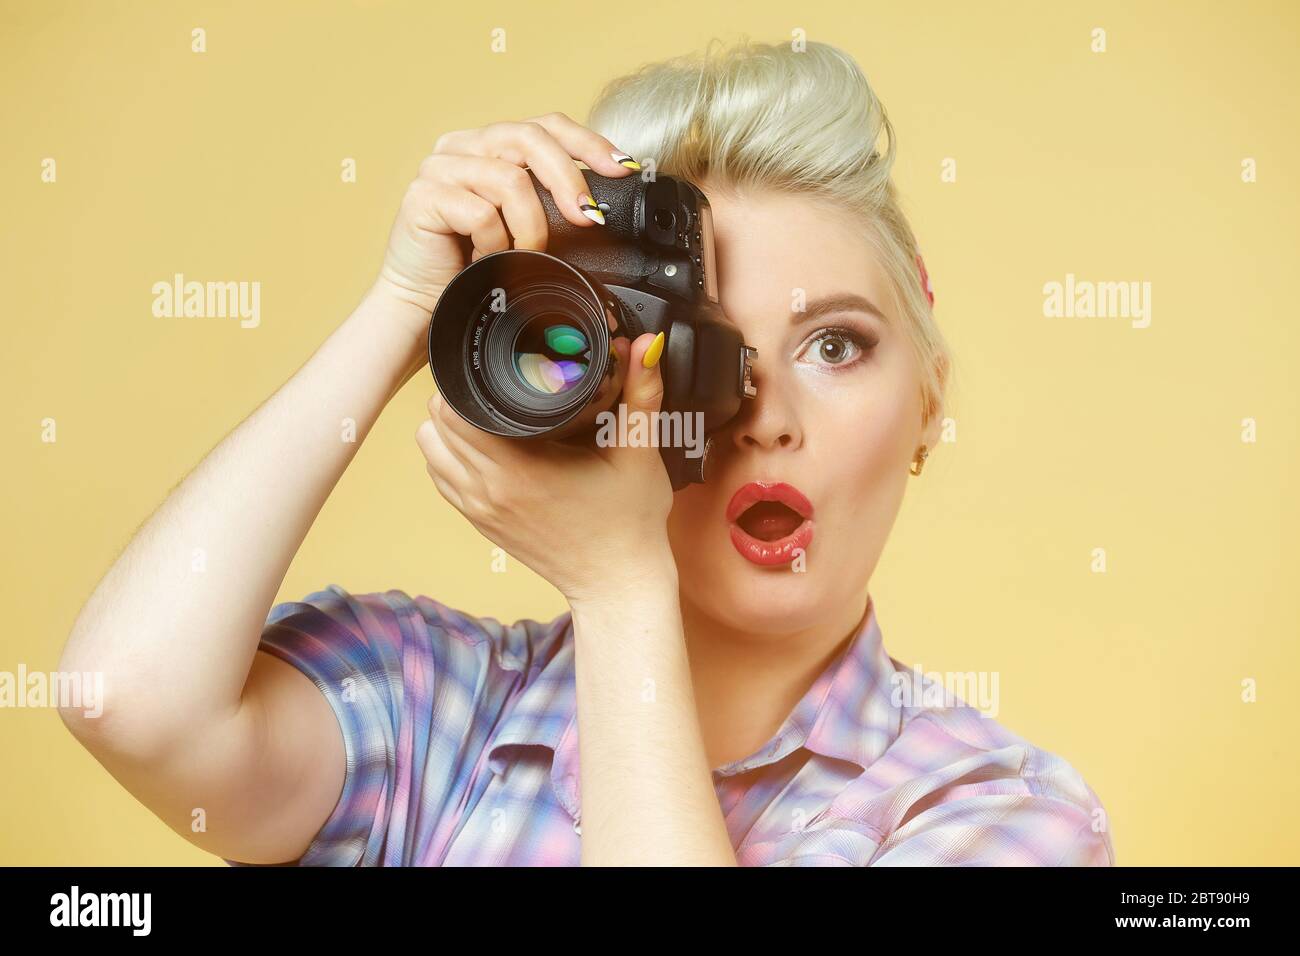 A photo of the pin-up girl with a photo camera Stock Photo